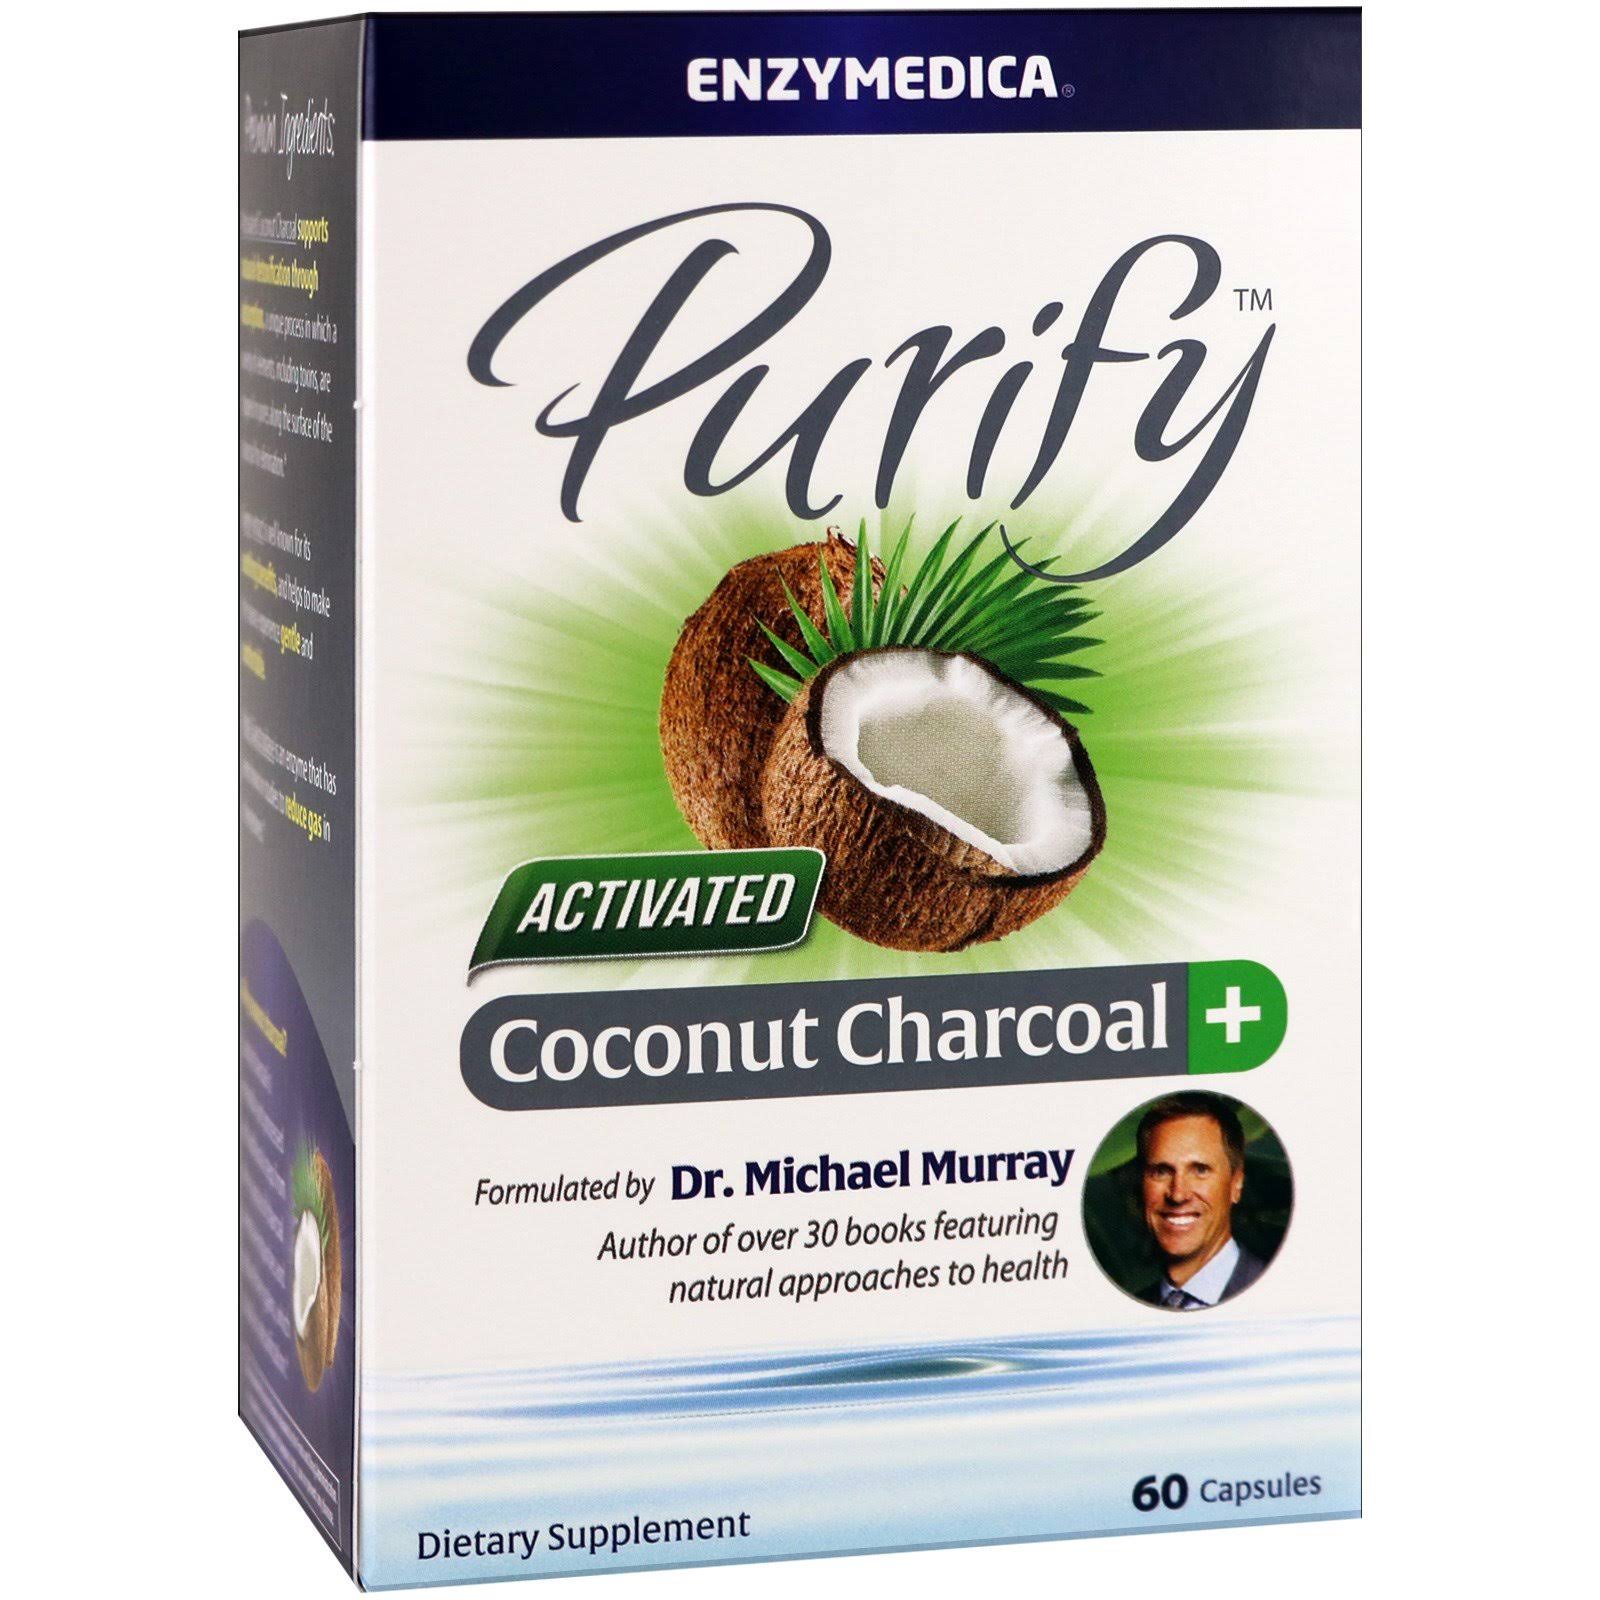 Enzymedica Purify Activated Coconut Charcoal + 60 Capsules